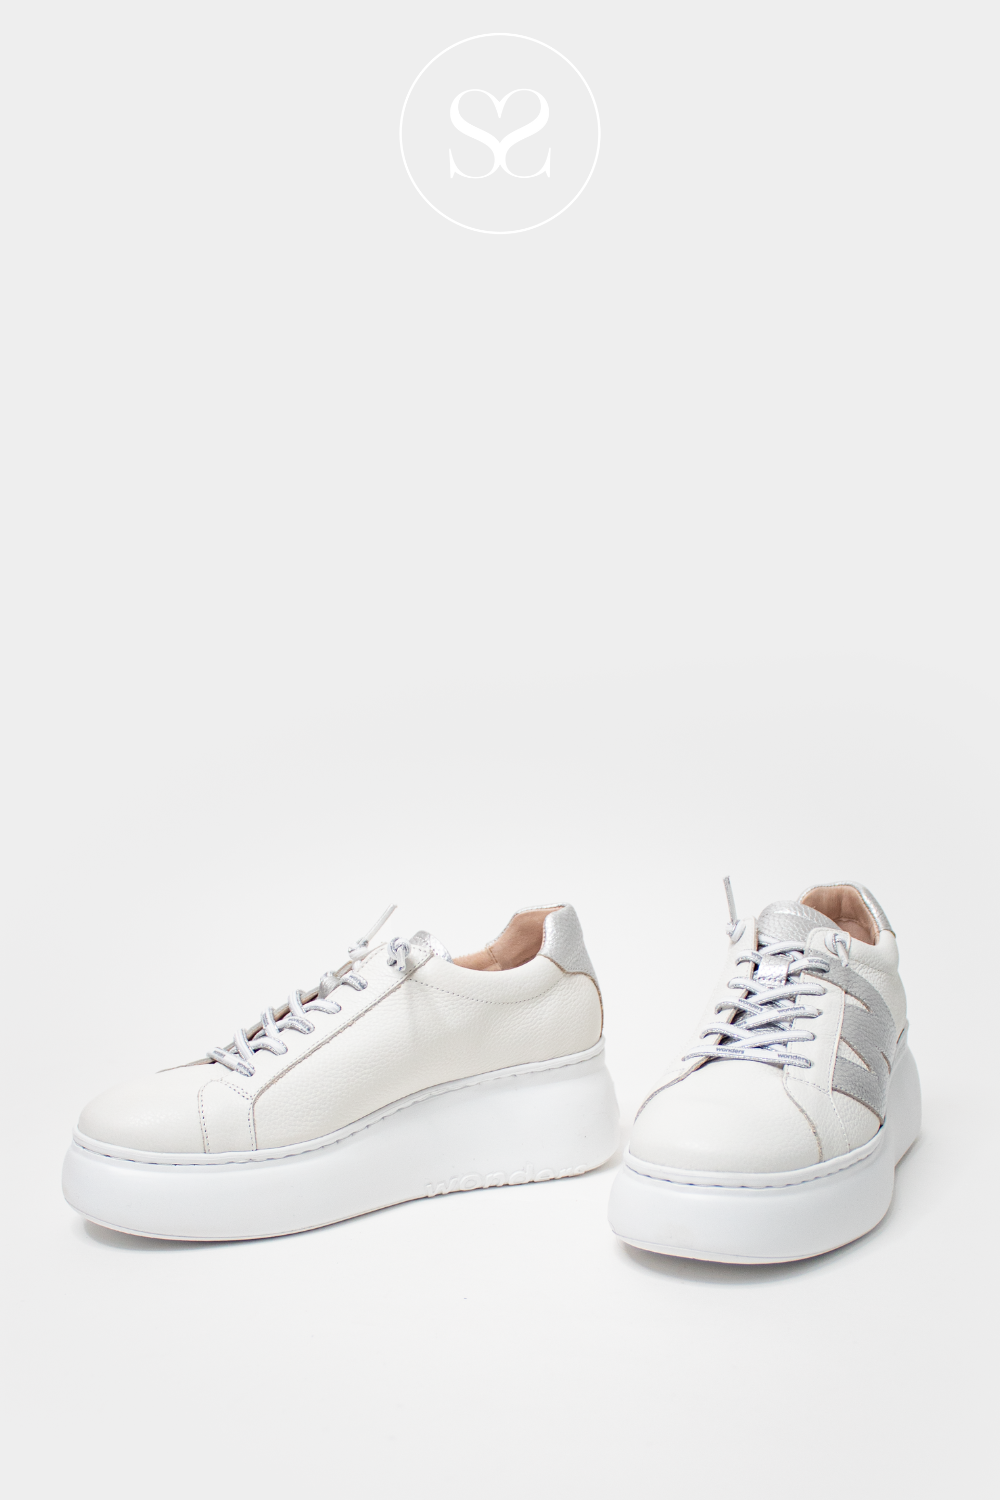 WONDERS A-2650 WHITE LEATHER PULL ON  WEDGE TRAINERS